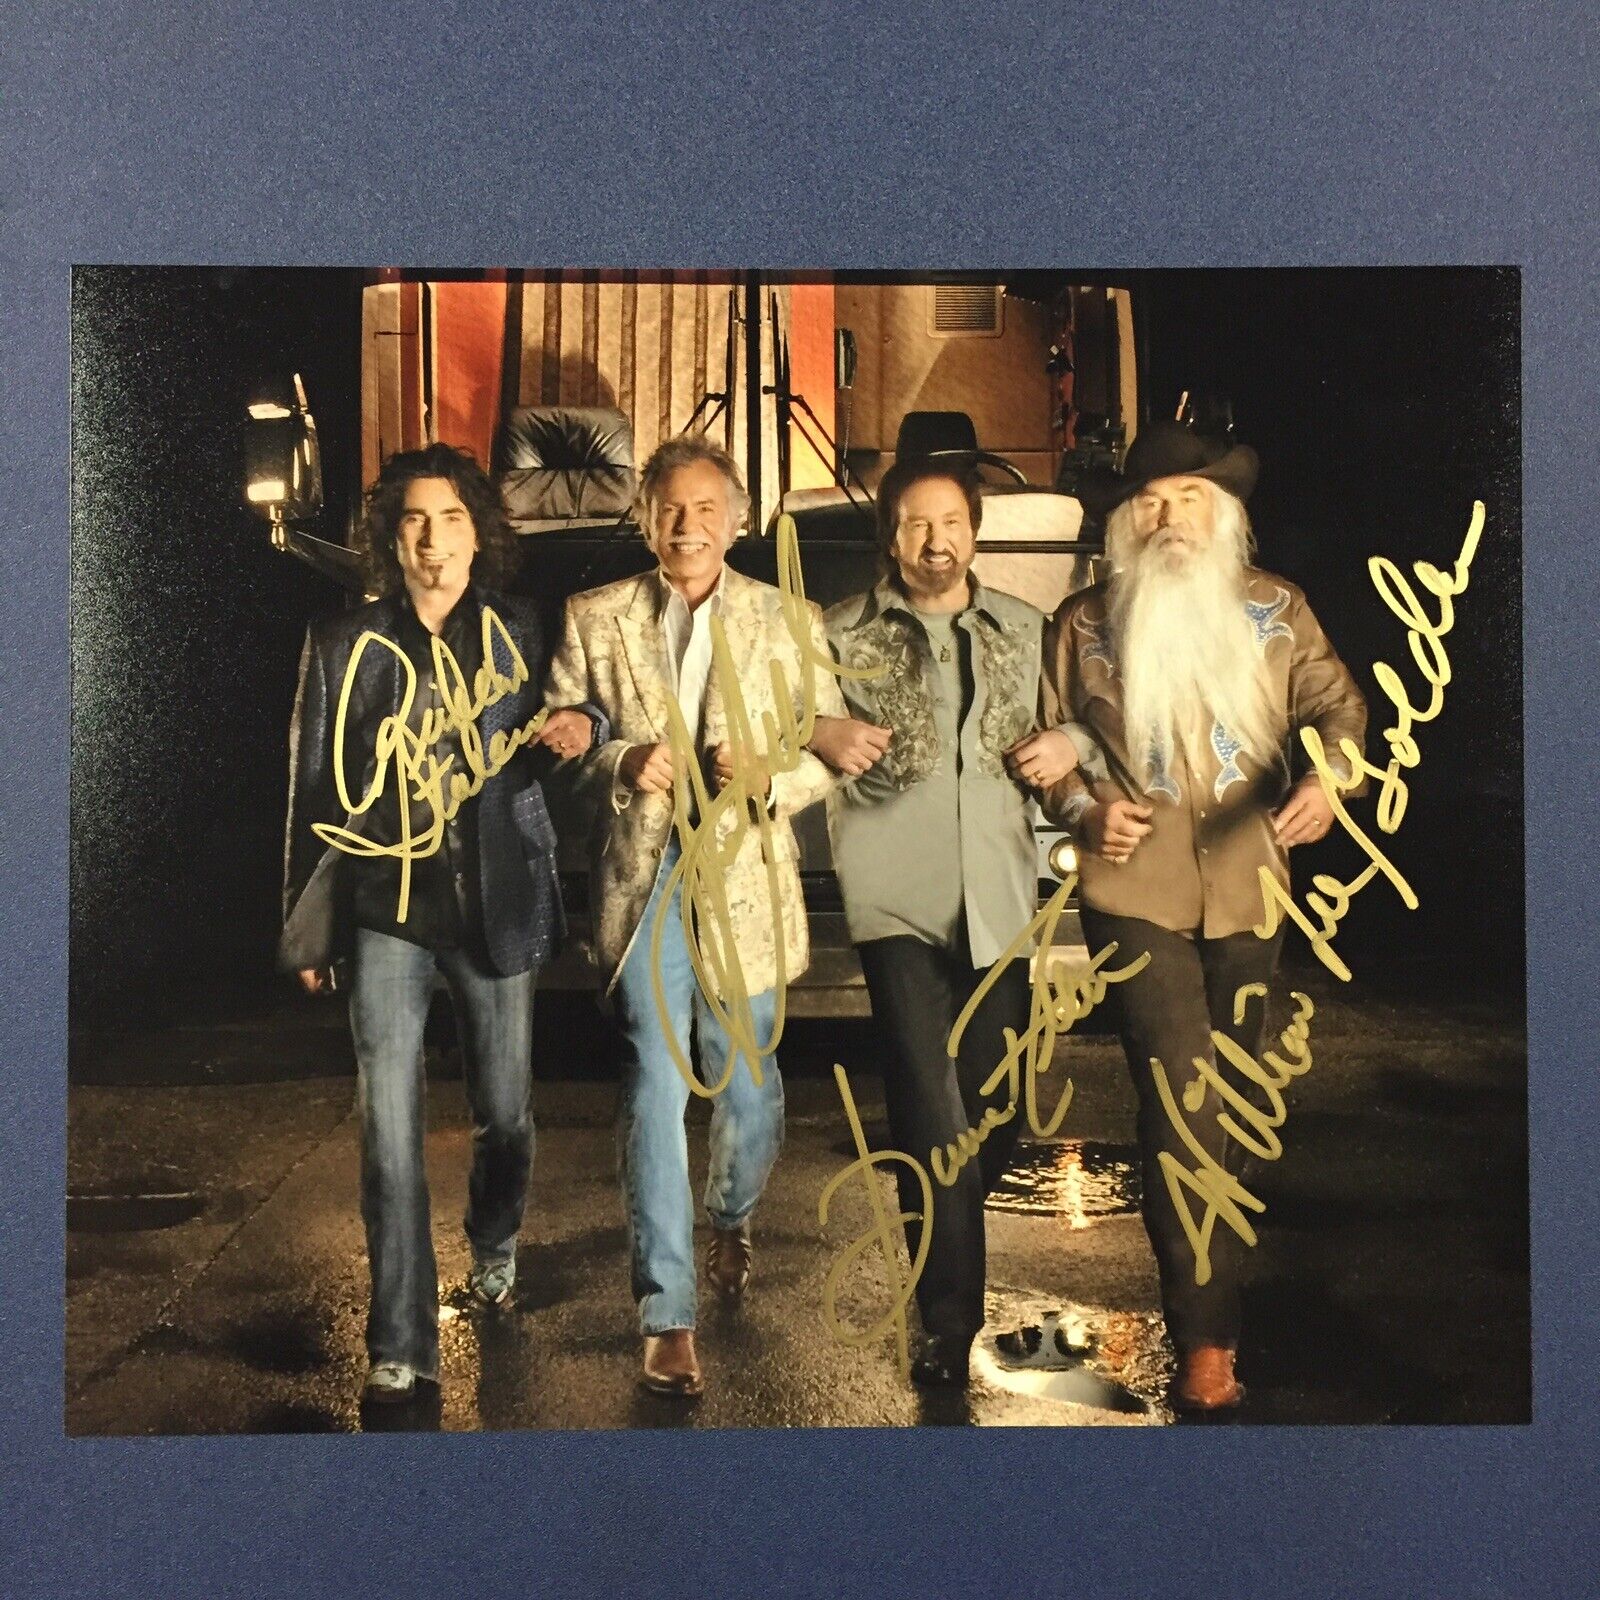 THE OAK RIDGE BOYS SIGNED 8X10 Photo Poster painting FULL BAND AUTOGRAPHED VERY RARE PROOF COA